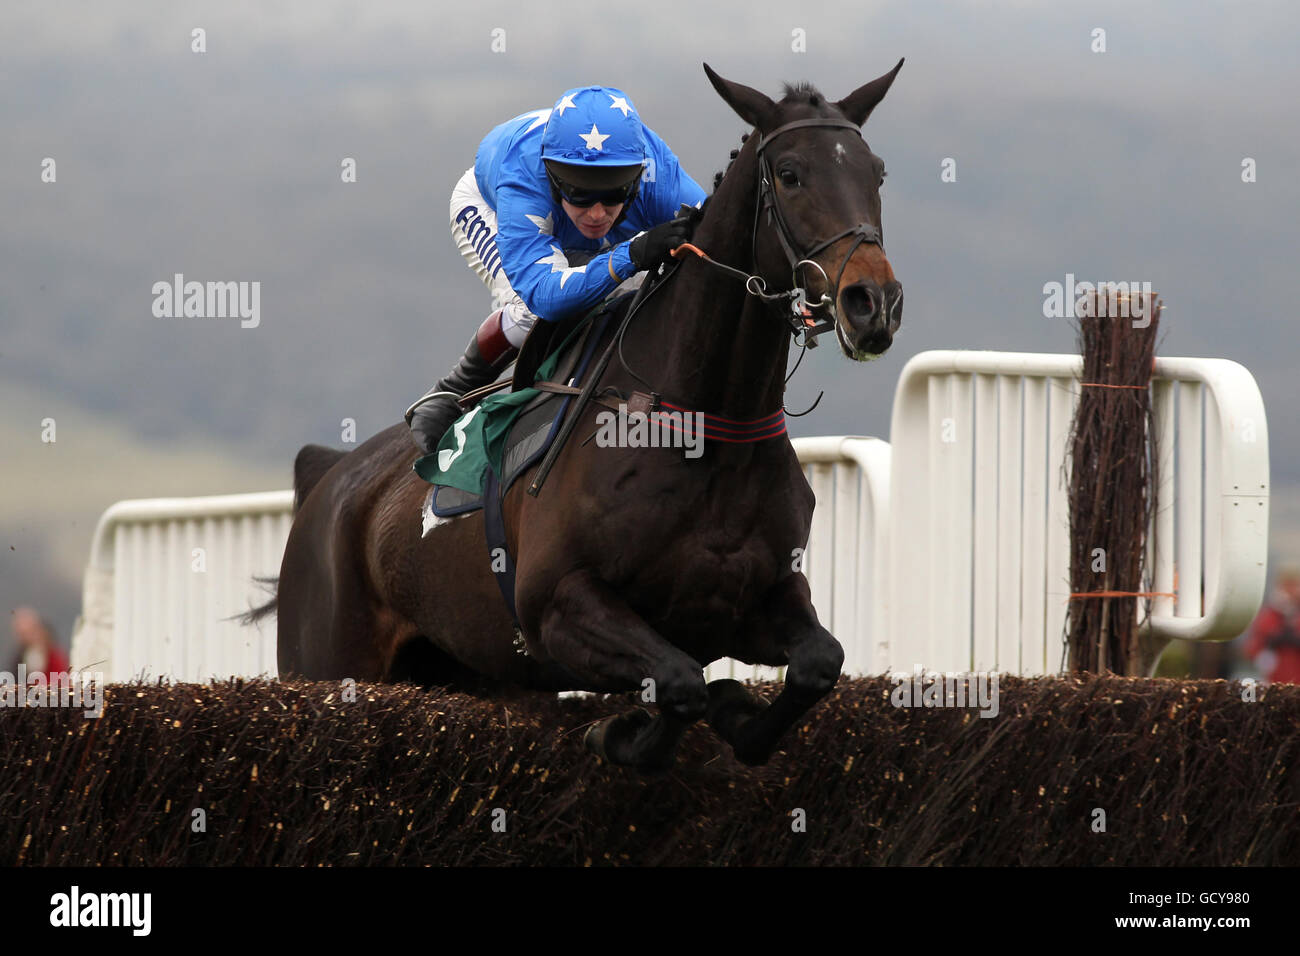 Horse Racing - Cheltenham Racecourse. Jockey Richard Johnson on Quinz jumps during the DRS Contracts Novices' Chase Stock Photo